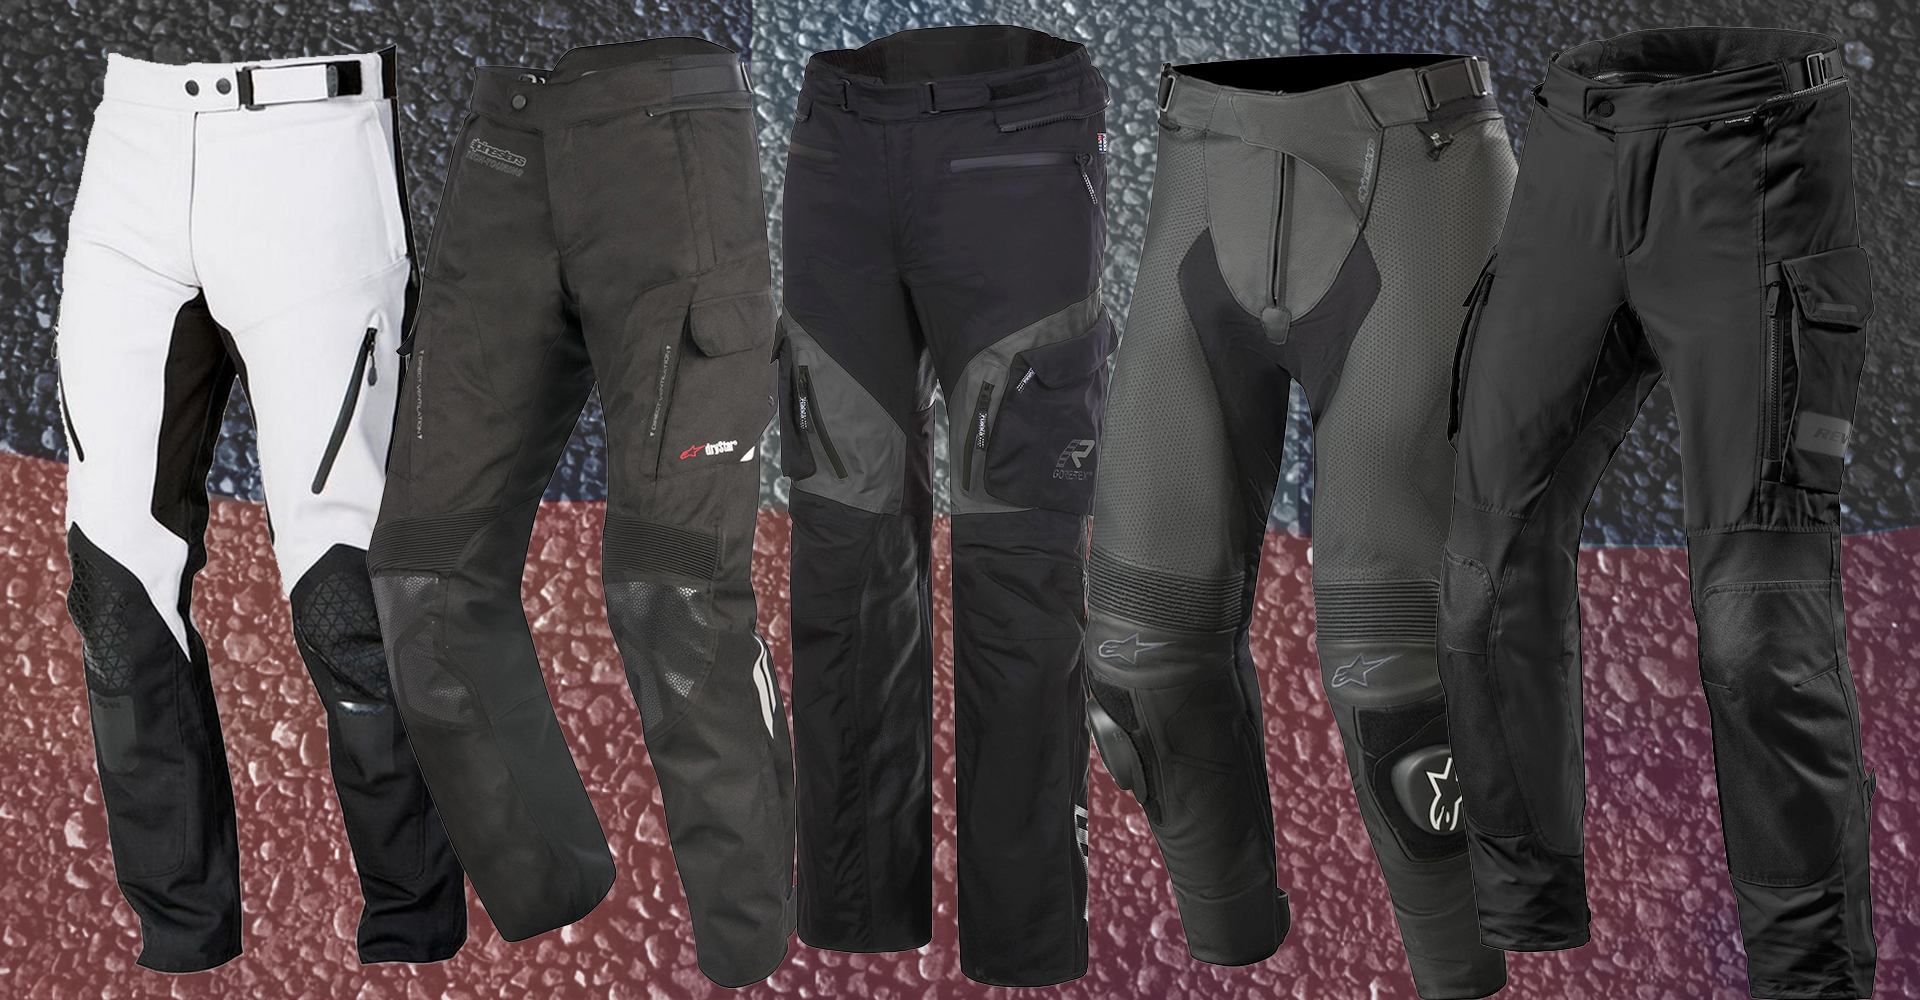 Bikers Gear Australia Classic Cut Kevlar Lined Protective Motorcycle Trouser Kevlar Jeans with Removable CE1621-1 Armour